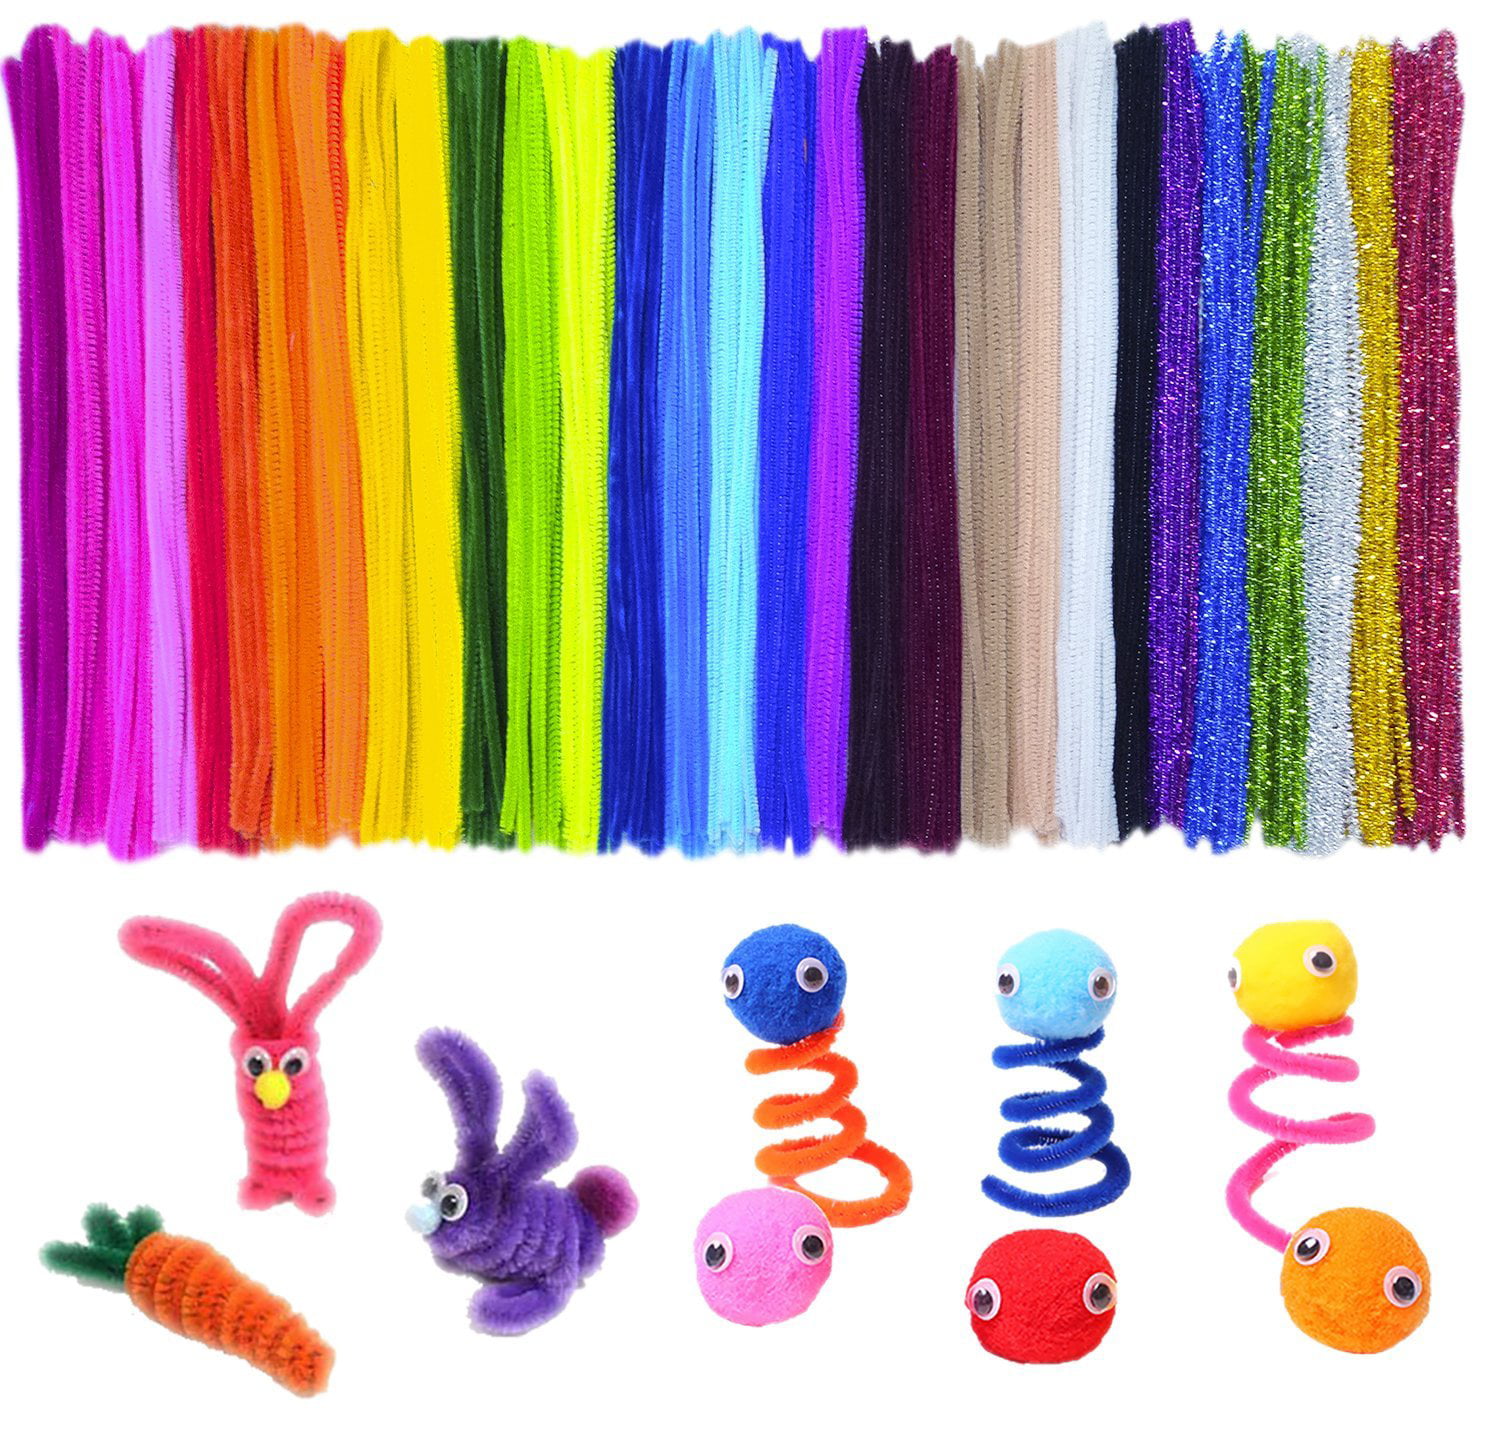 6 mm x 12 inch 1000 Pcs Pipe Cleaners Chenille Stems with 100 Accessories，10 Assorted Colors for DIY Art Craft Decorations